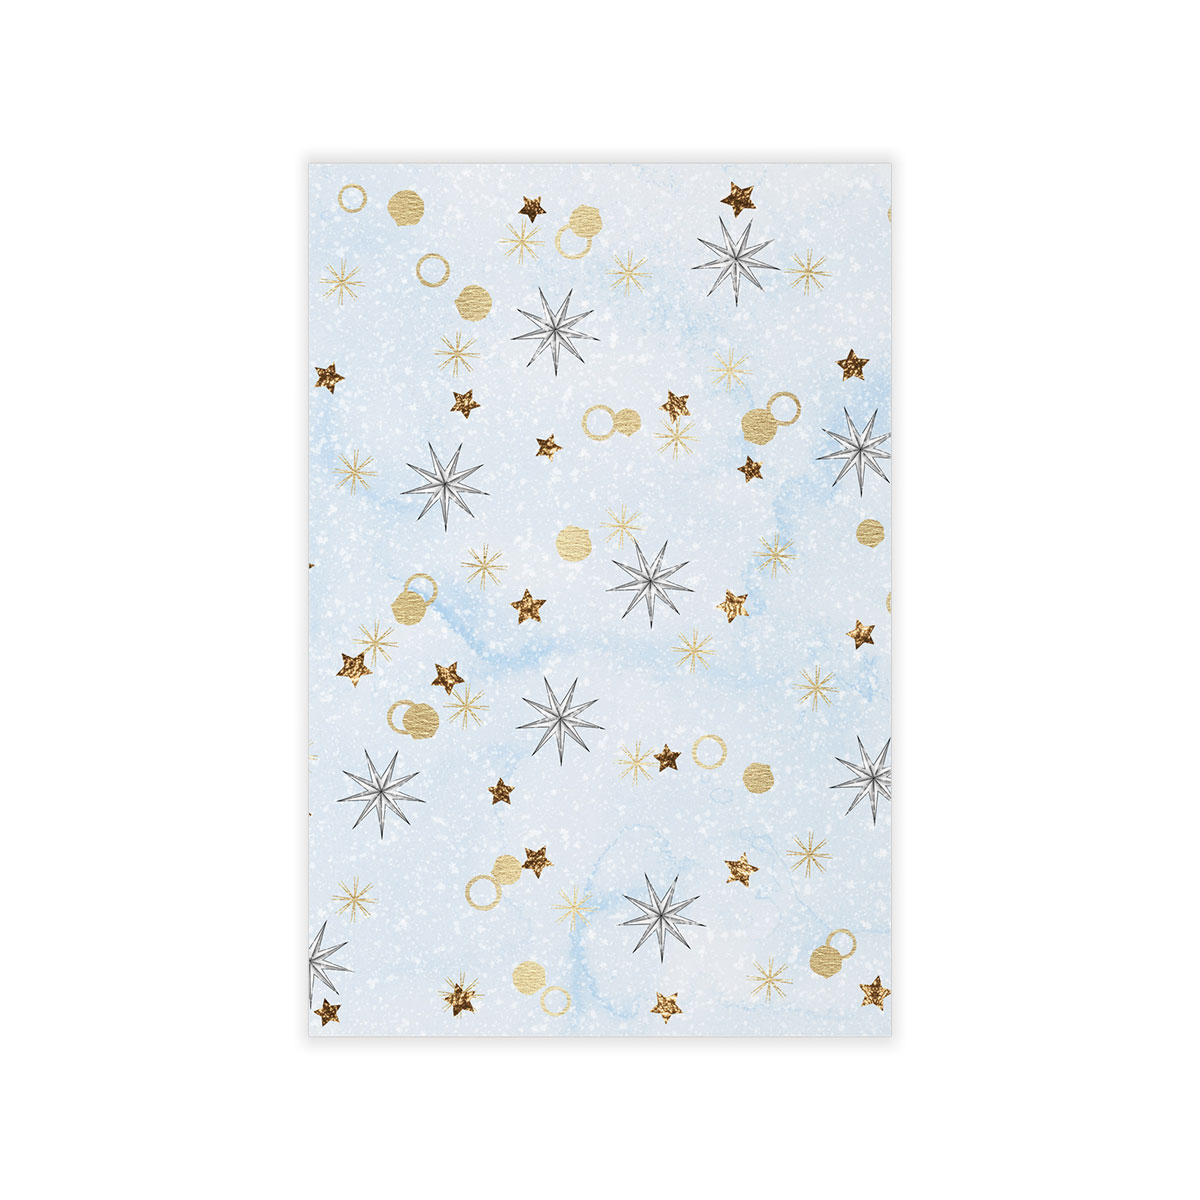 Gold Christmas Star On Snowflake Background Wall Decals